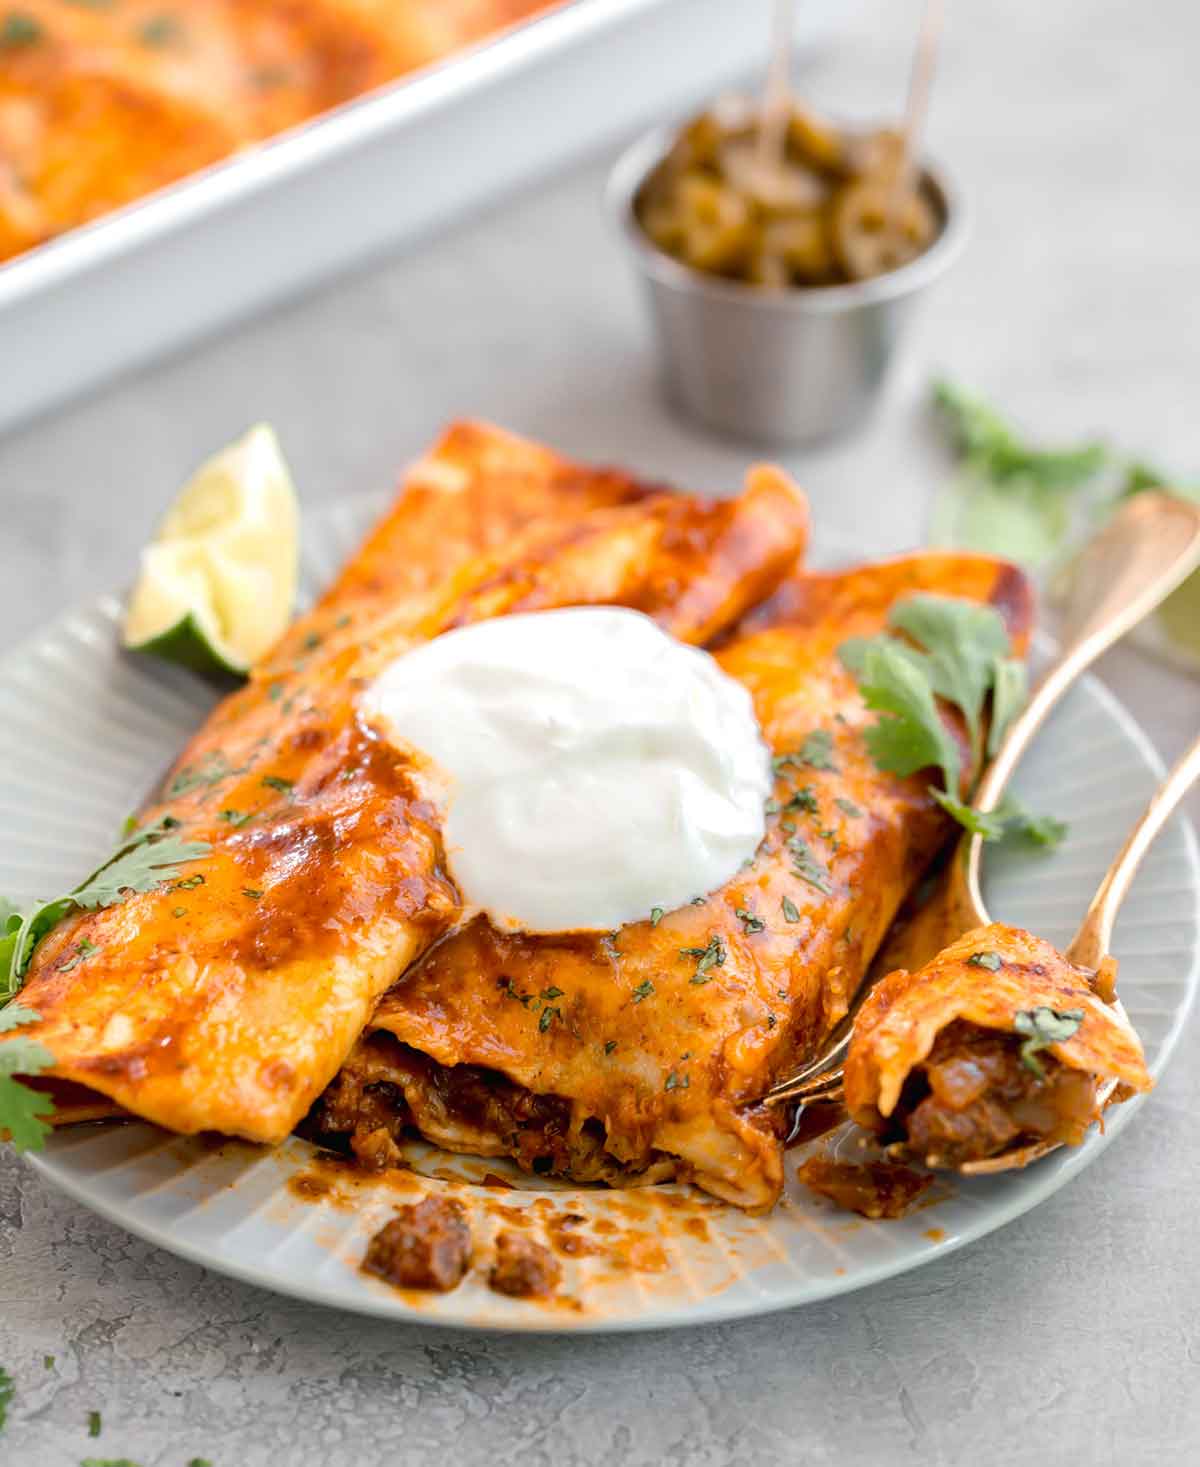 Two beef enchiladas on a plate with a dollop of sour cream on top.